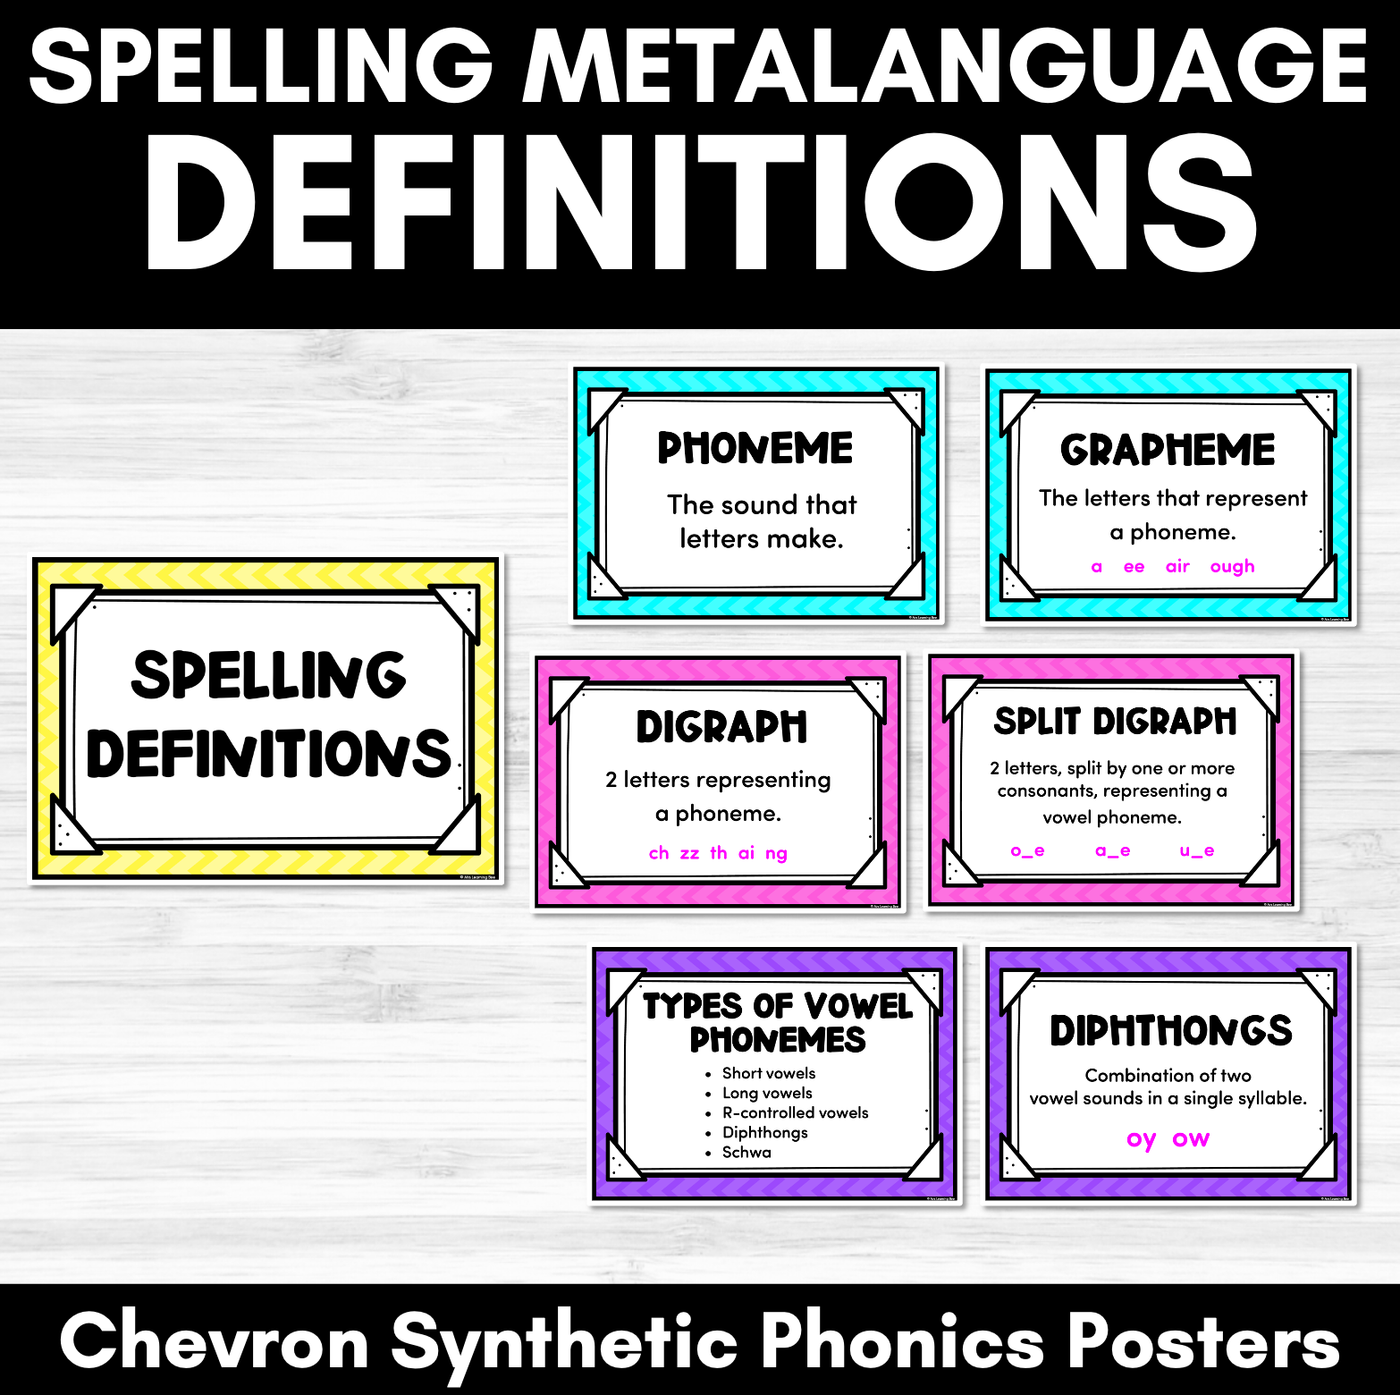 Synthetic Phonics Spelling Definitions - Spelling Metalanguage Posters - CHEVRON